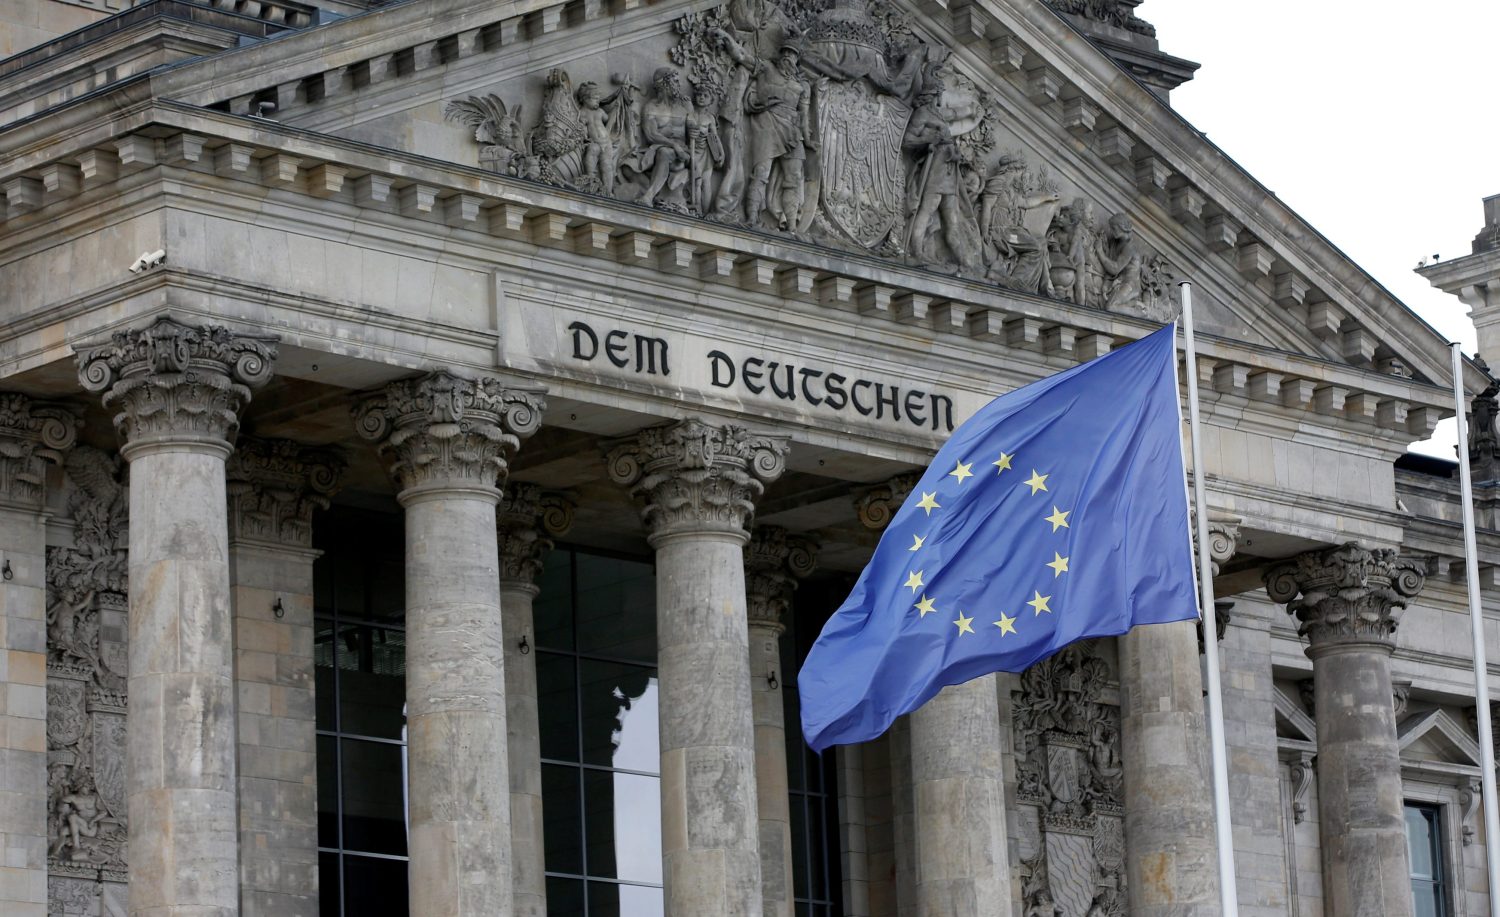 German European Union flag is pictured in front of the Reichstags building, the seat of the lower house of parliament Bundestag, before a debate about the Brexit in Berlin, Germany, June 28, 2016. REUTERS/Fabrizio Bensch - RTX2IM6E